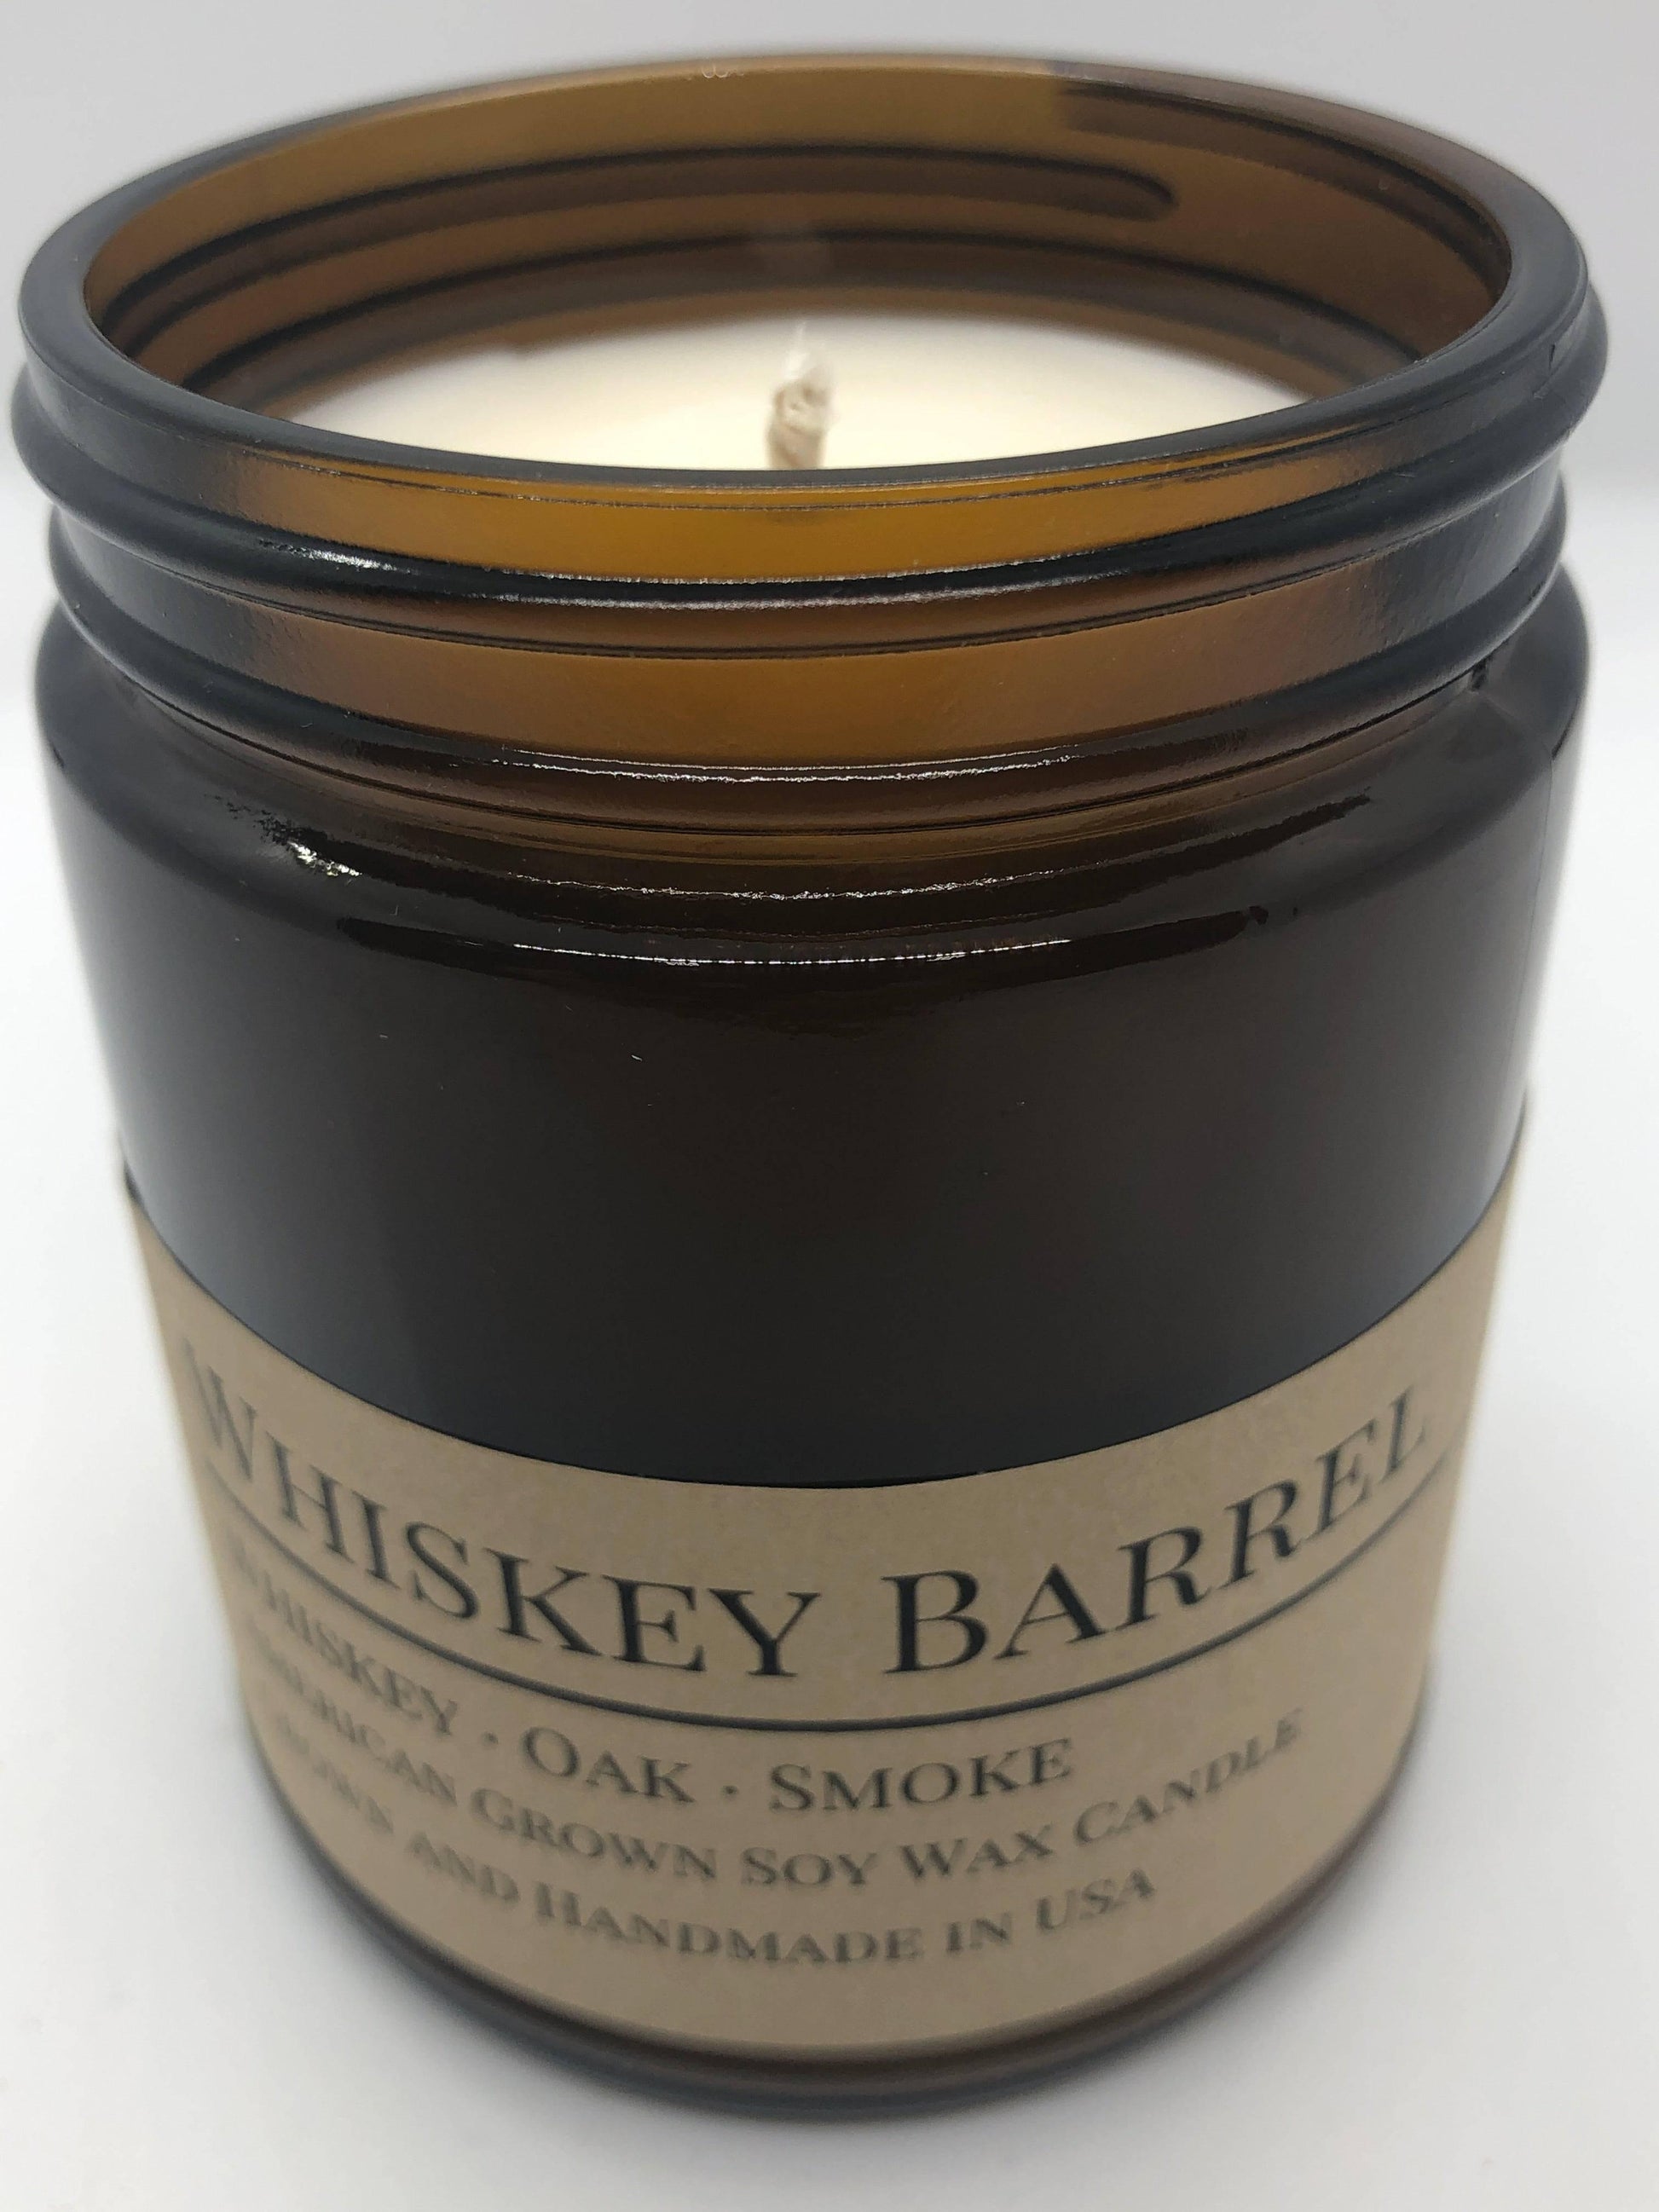 Whiskey Barrel Soy Wax Candle | 9 oz Amber Apothecary Jar - Prairie Fire Candles